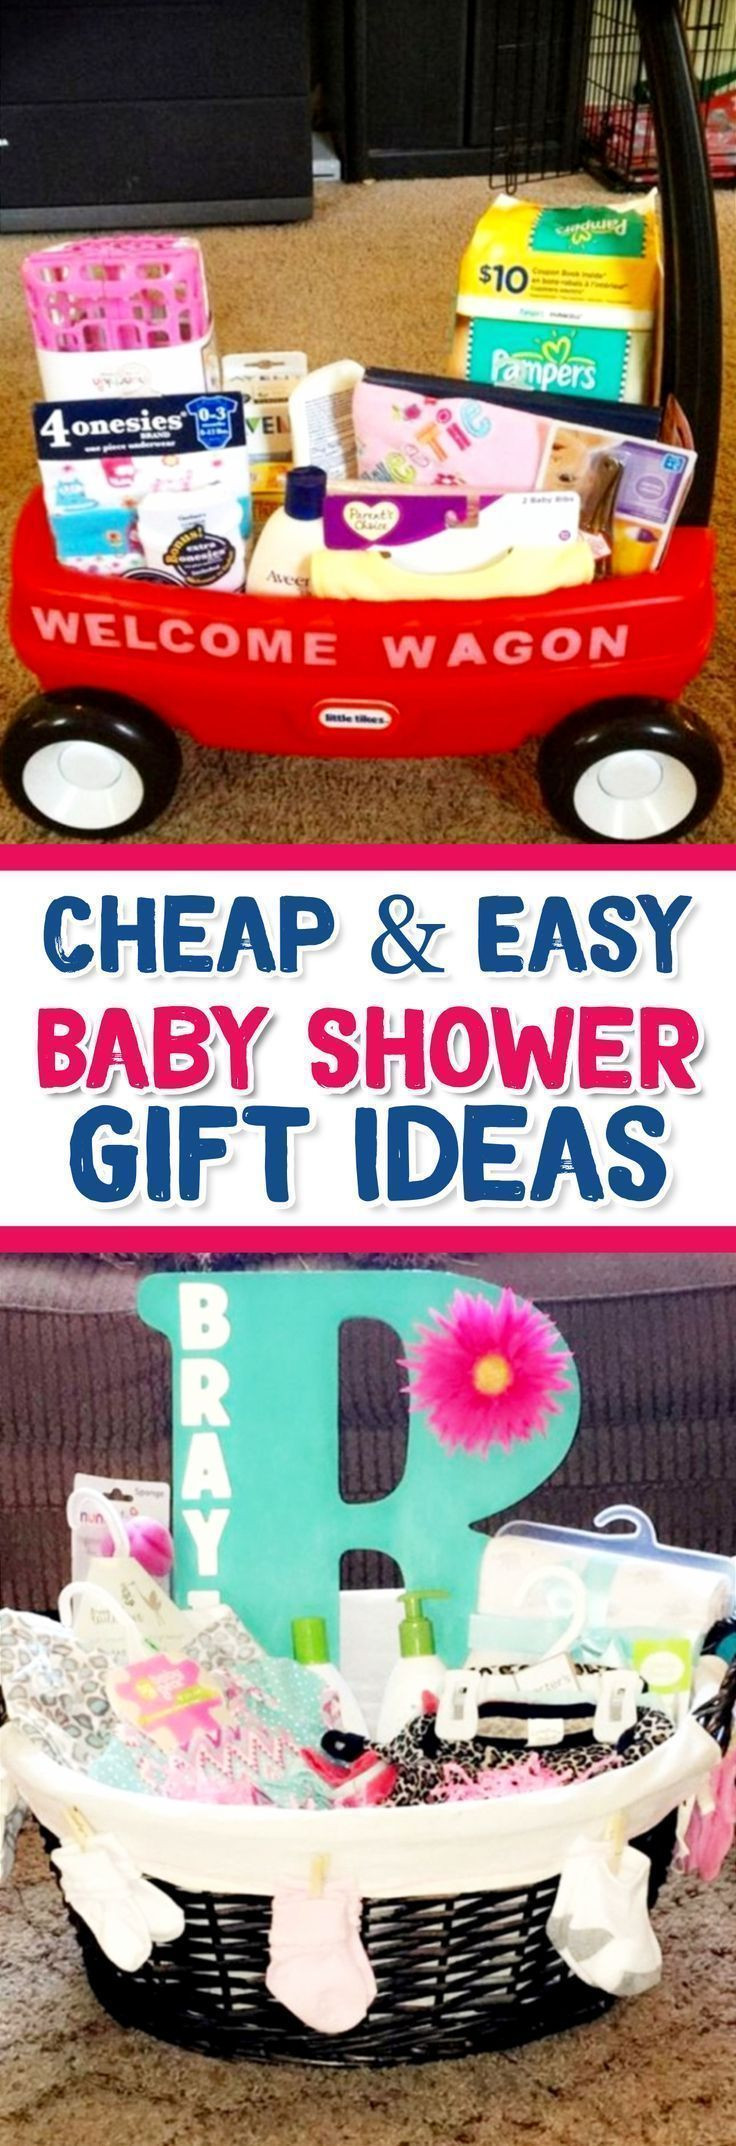 Cheap Gift Ideas For Boys
 28 Affordable & Cheap Baby Shower Gift Ideas For Those on